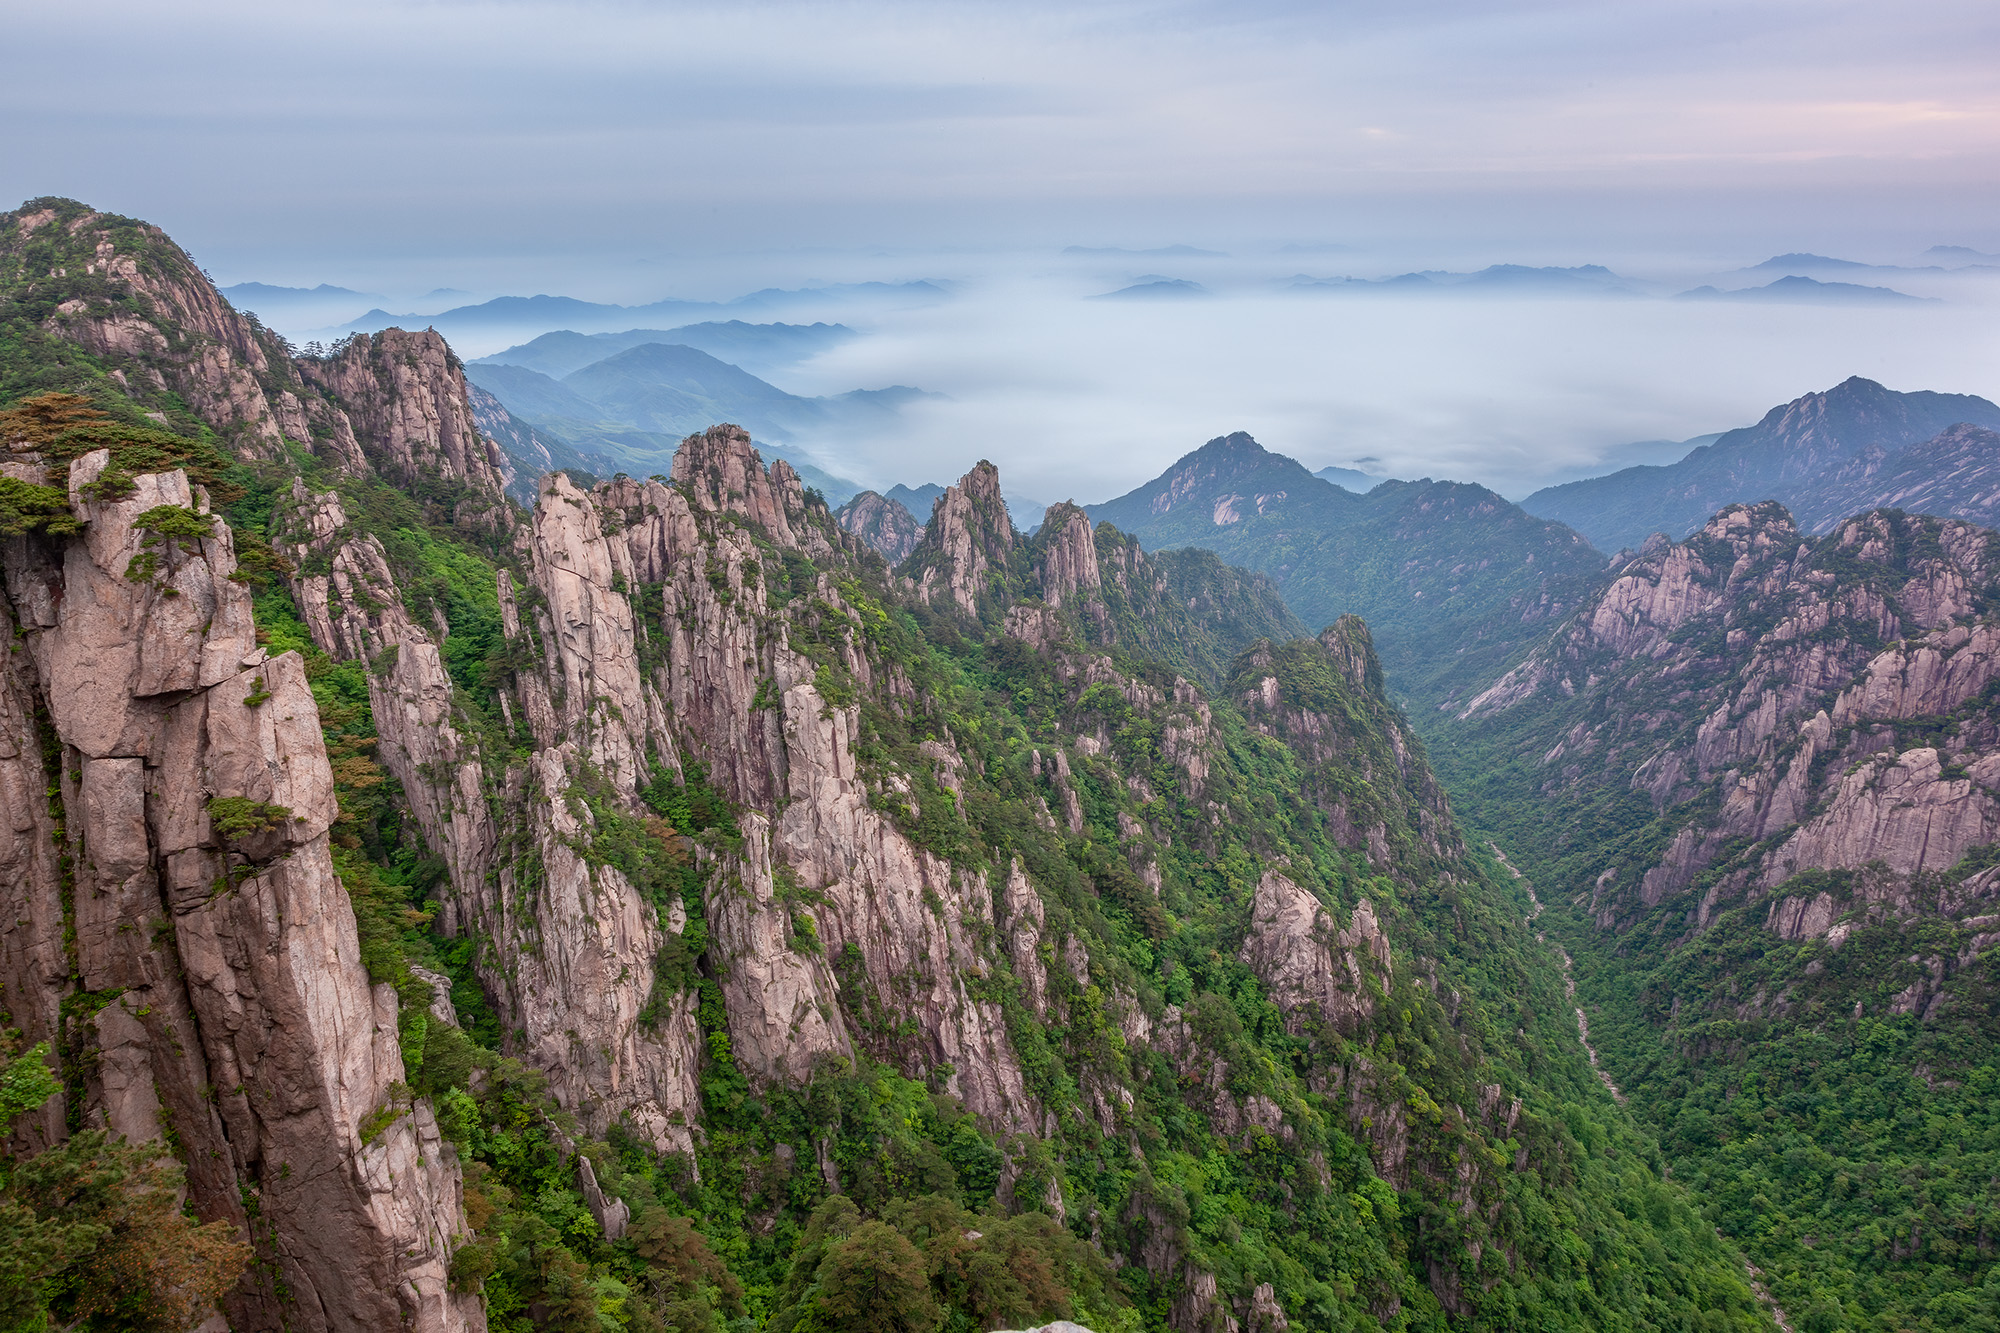 In this image from Mount Huangshan, China, we're presented with the signature landscapes of the region. Towering mountains adorned...